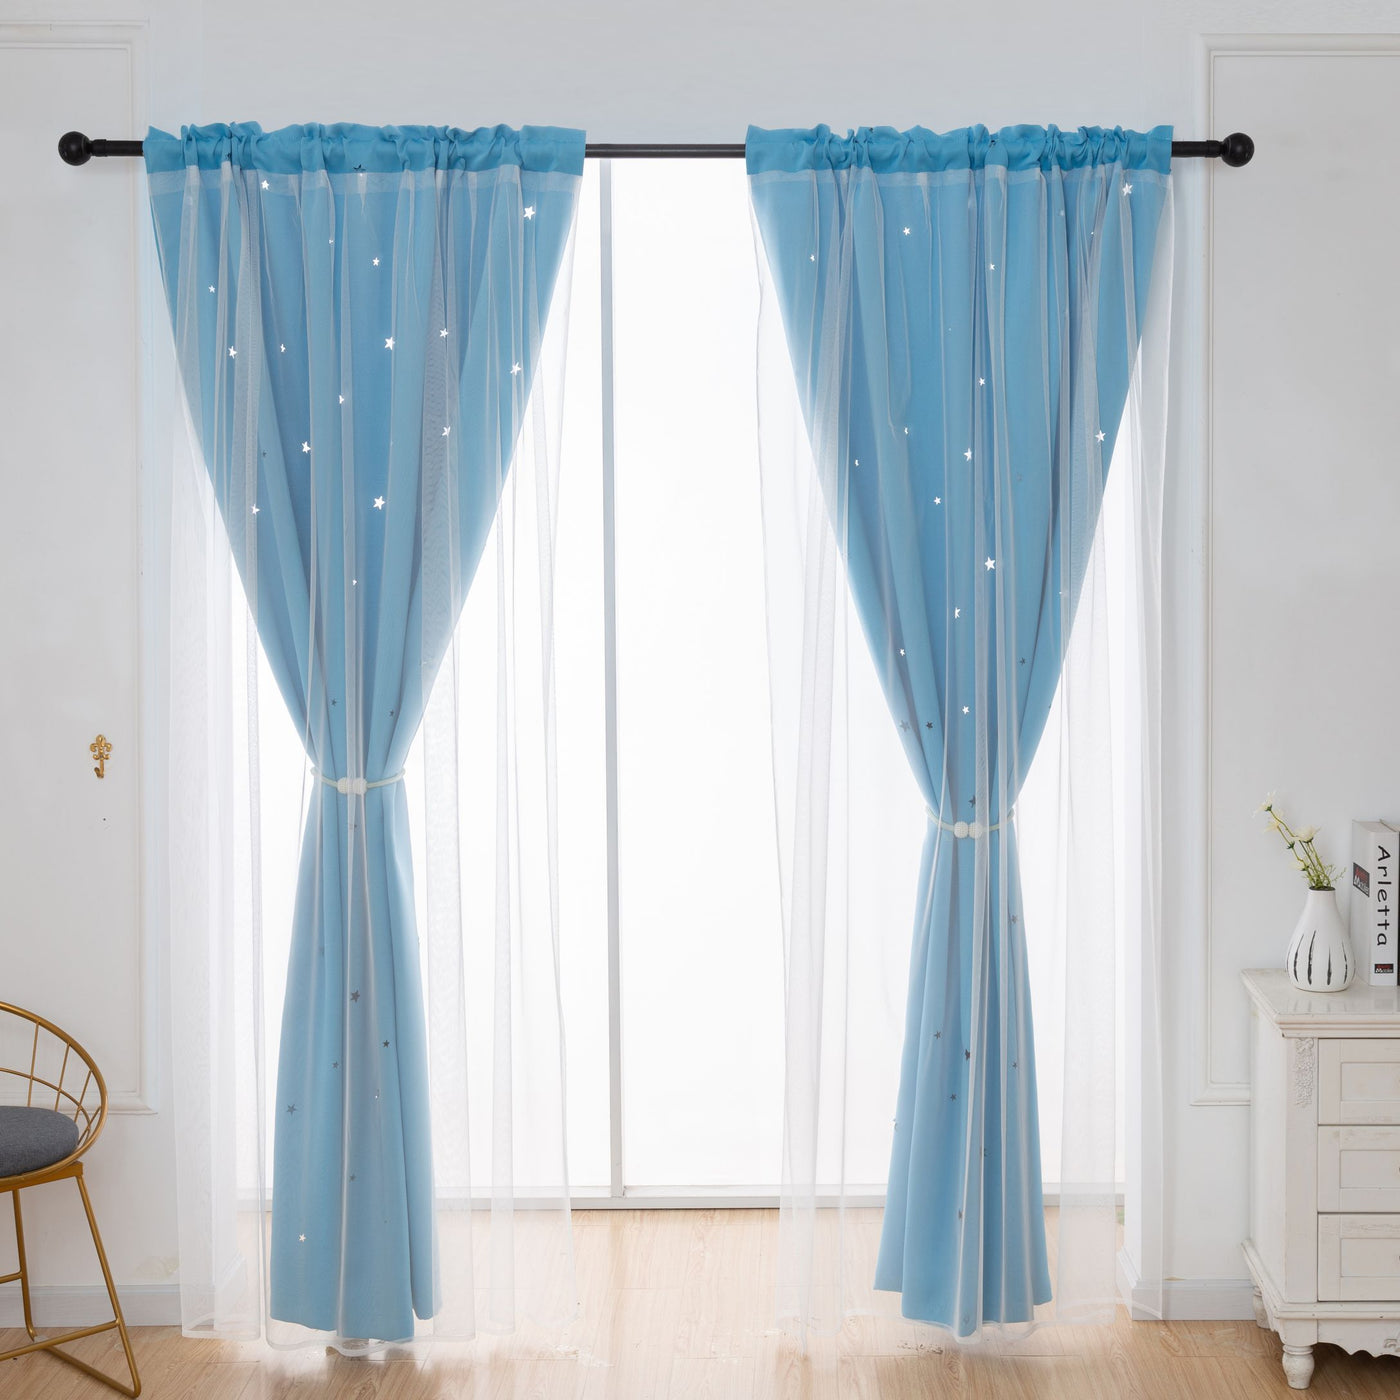 Stars Blackout Curtains Kids Bedroom Double Layer Star Cut Out Solid Window Curtains Rod Pocket